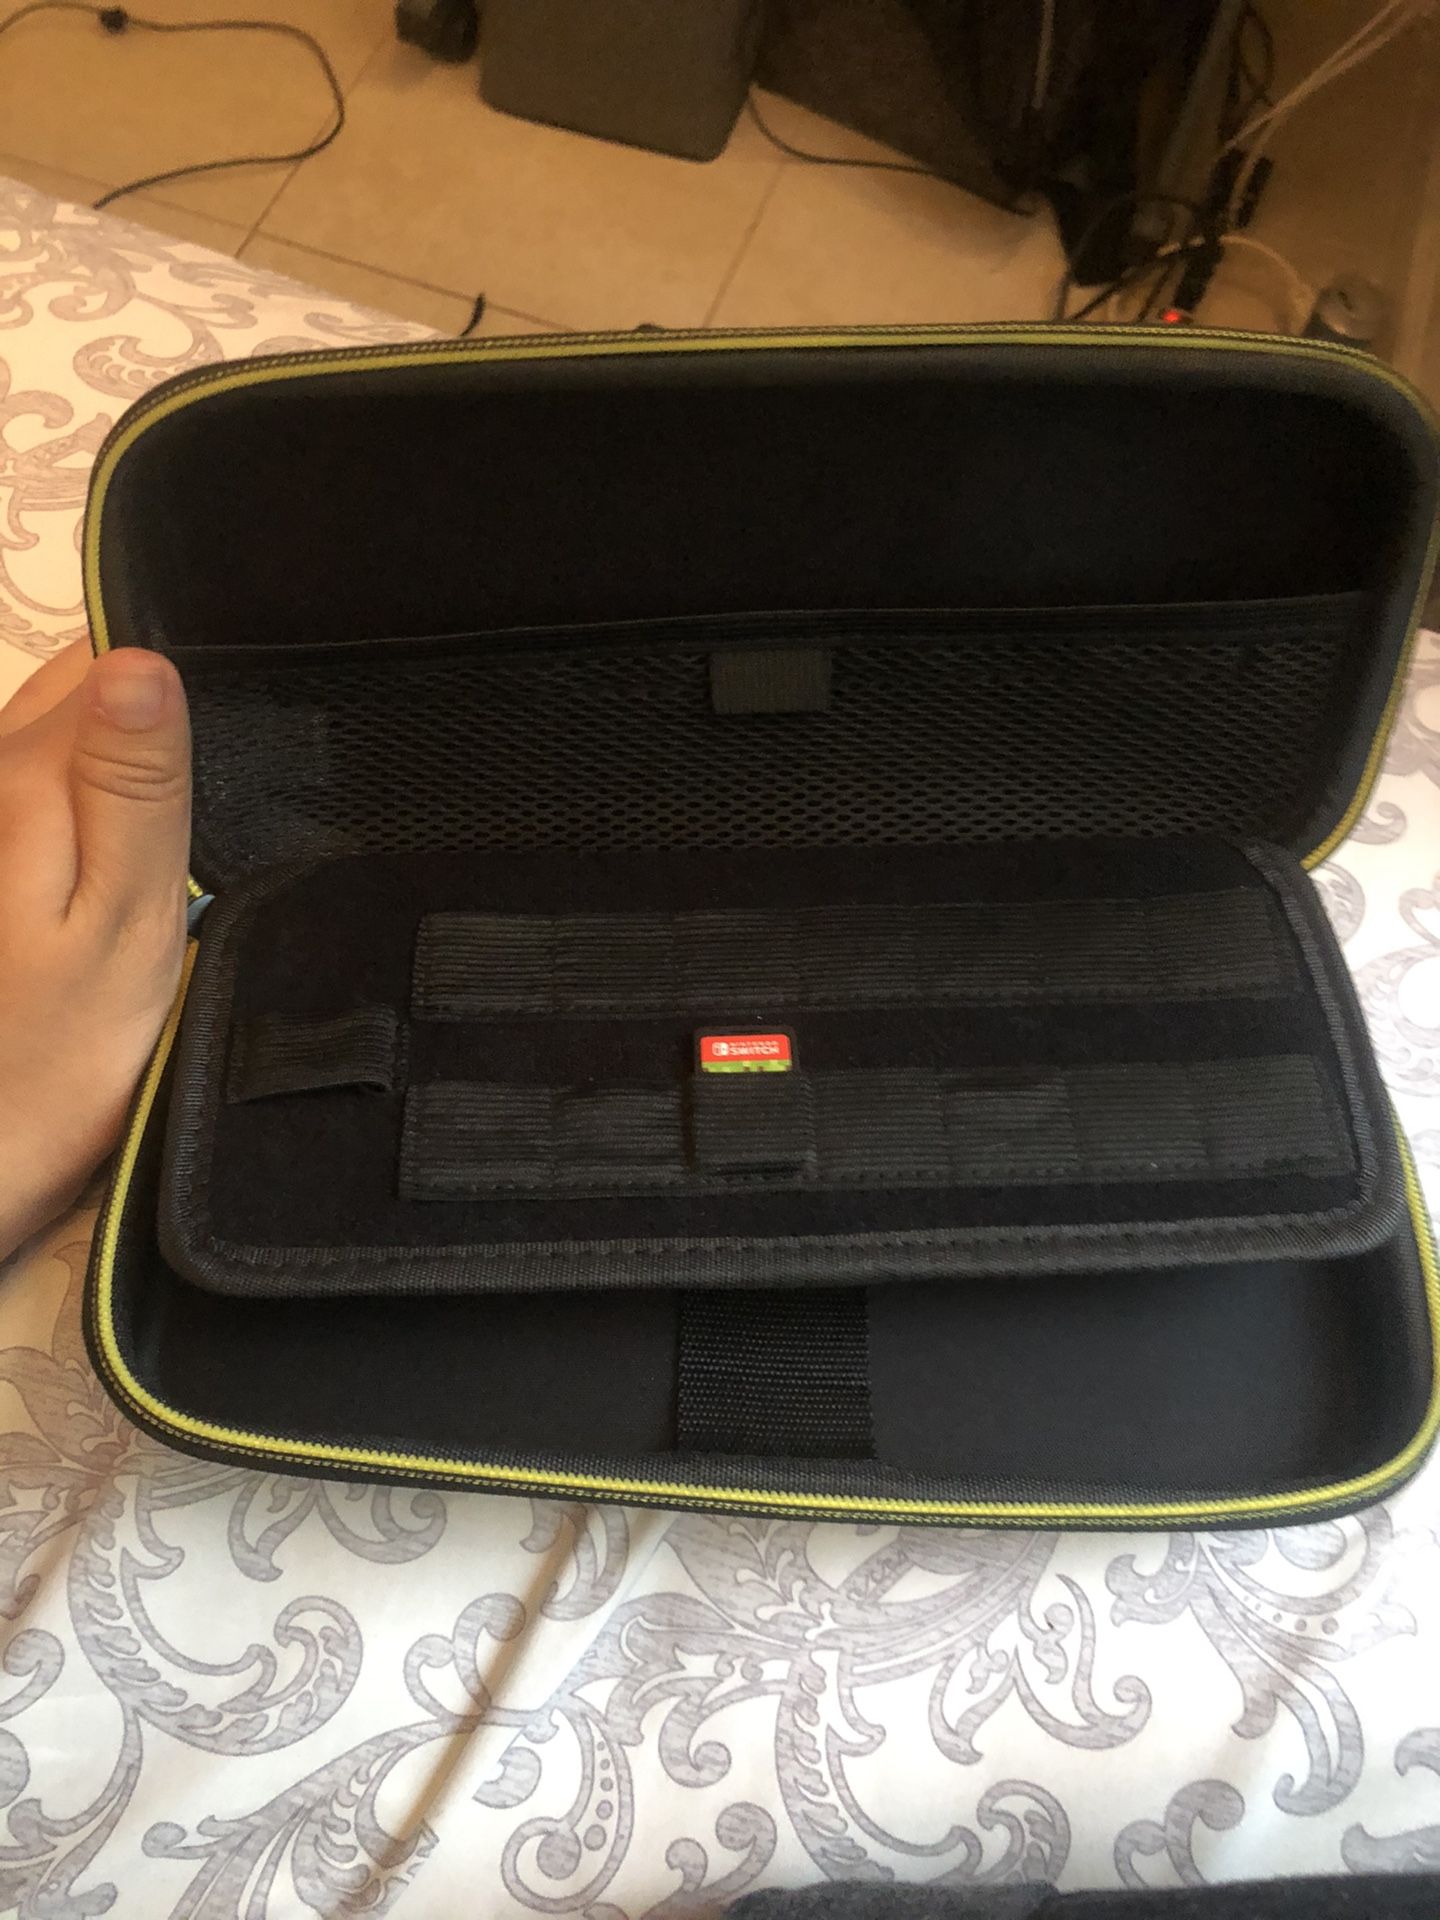 Nintendo switch carrying case & Mine Craft